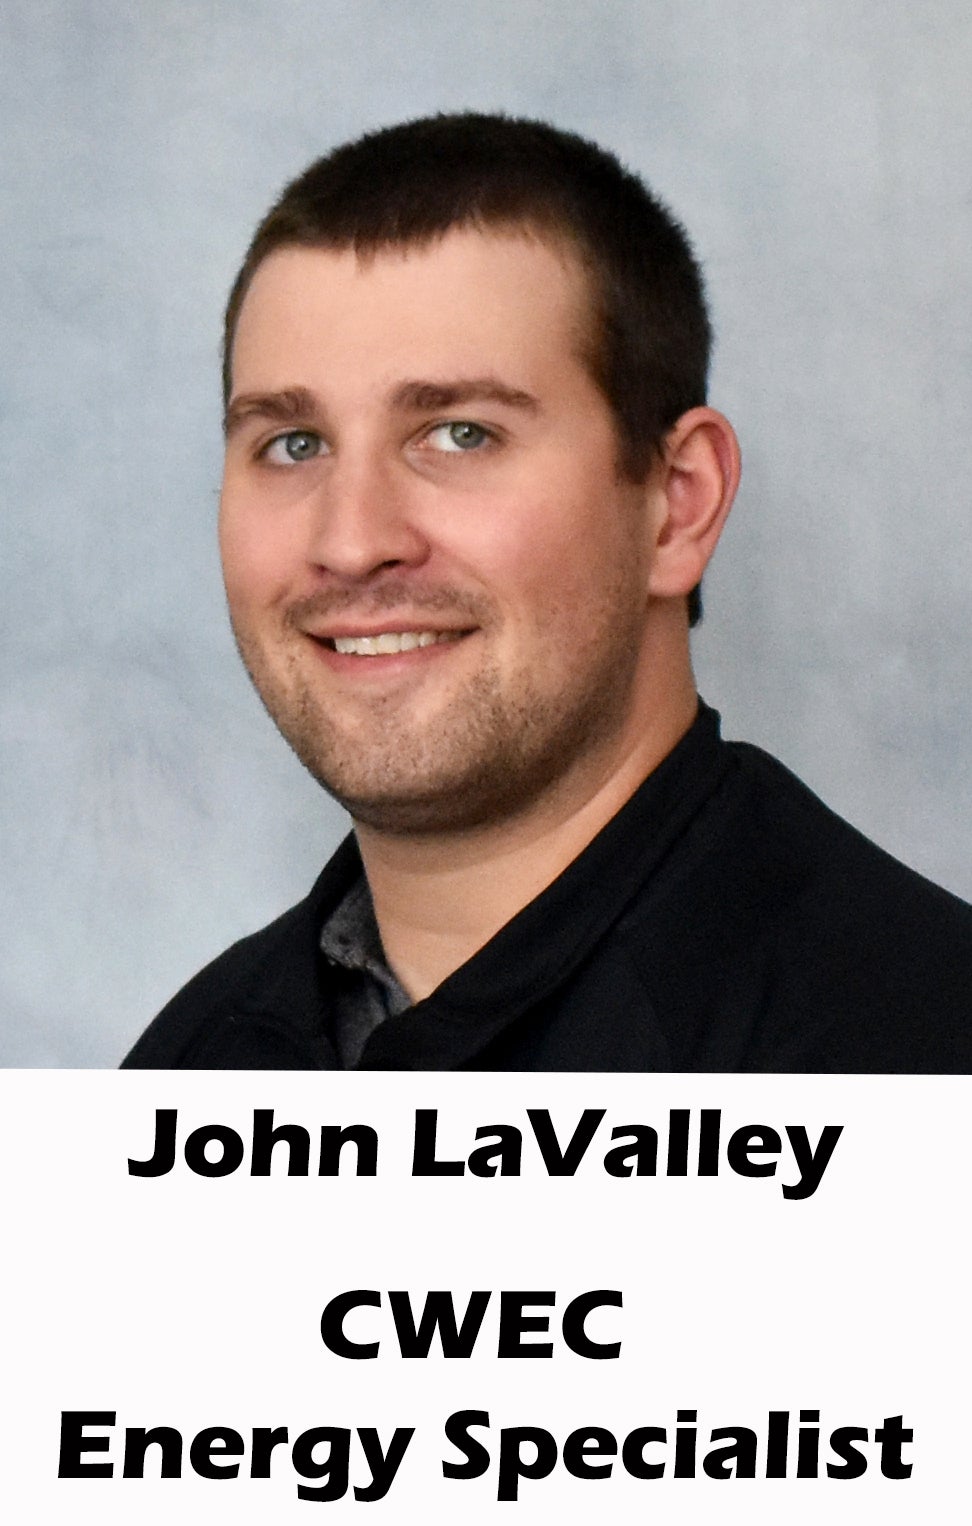 John LaValley, CWEC Energy Specialist